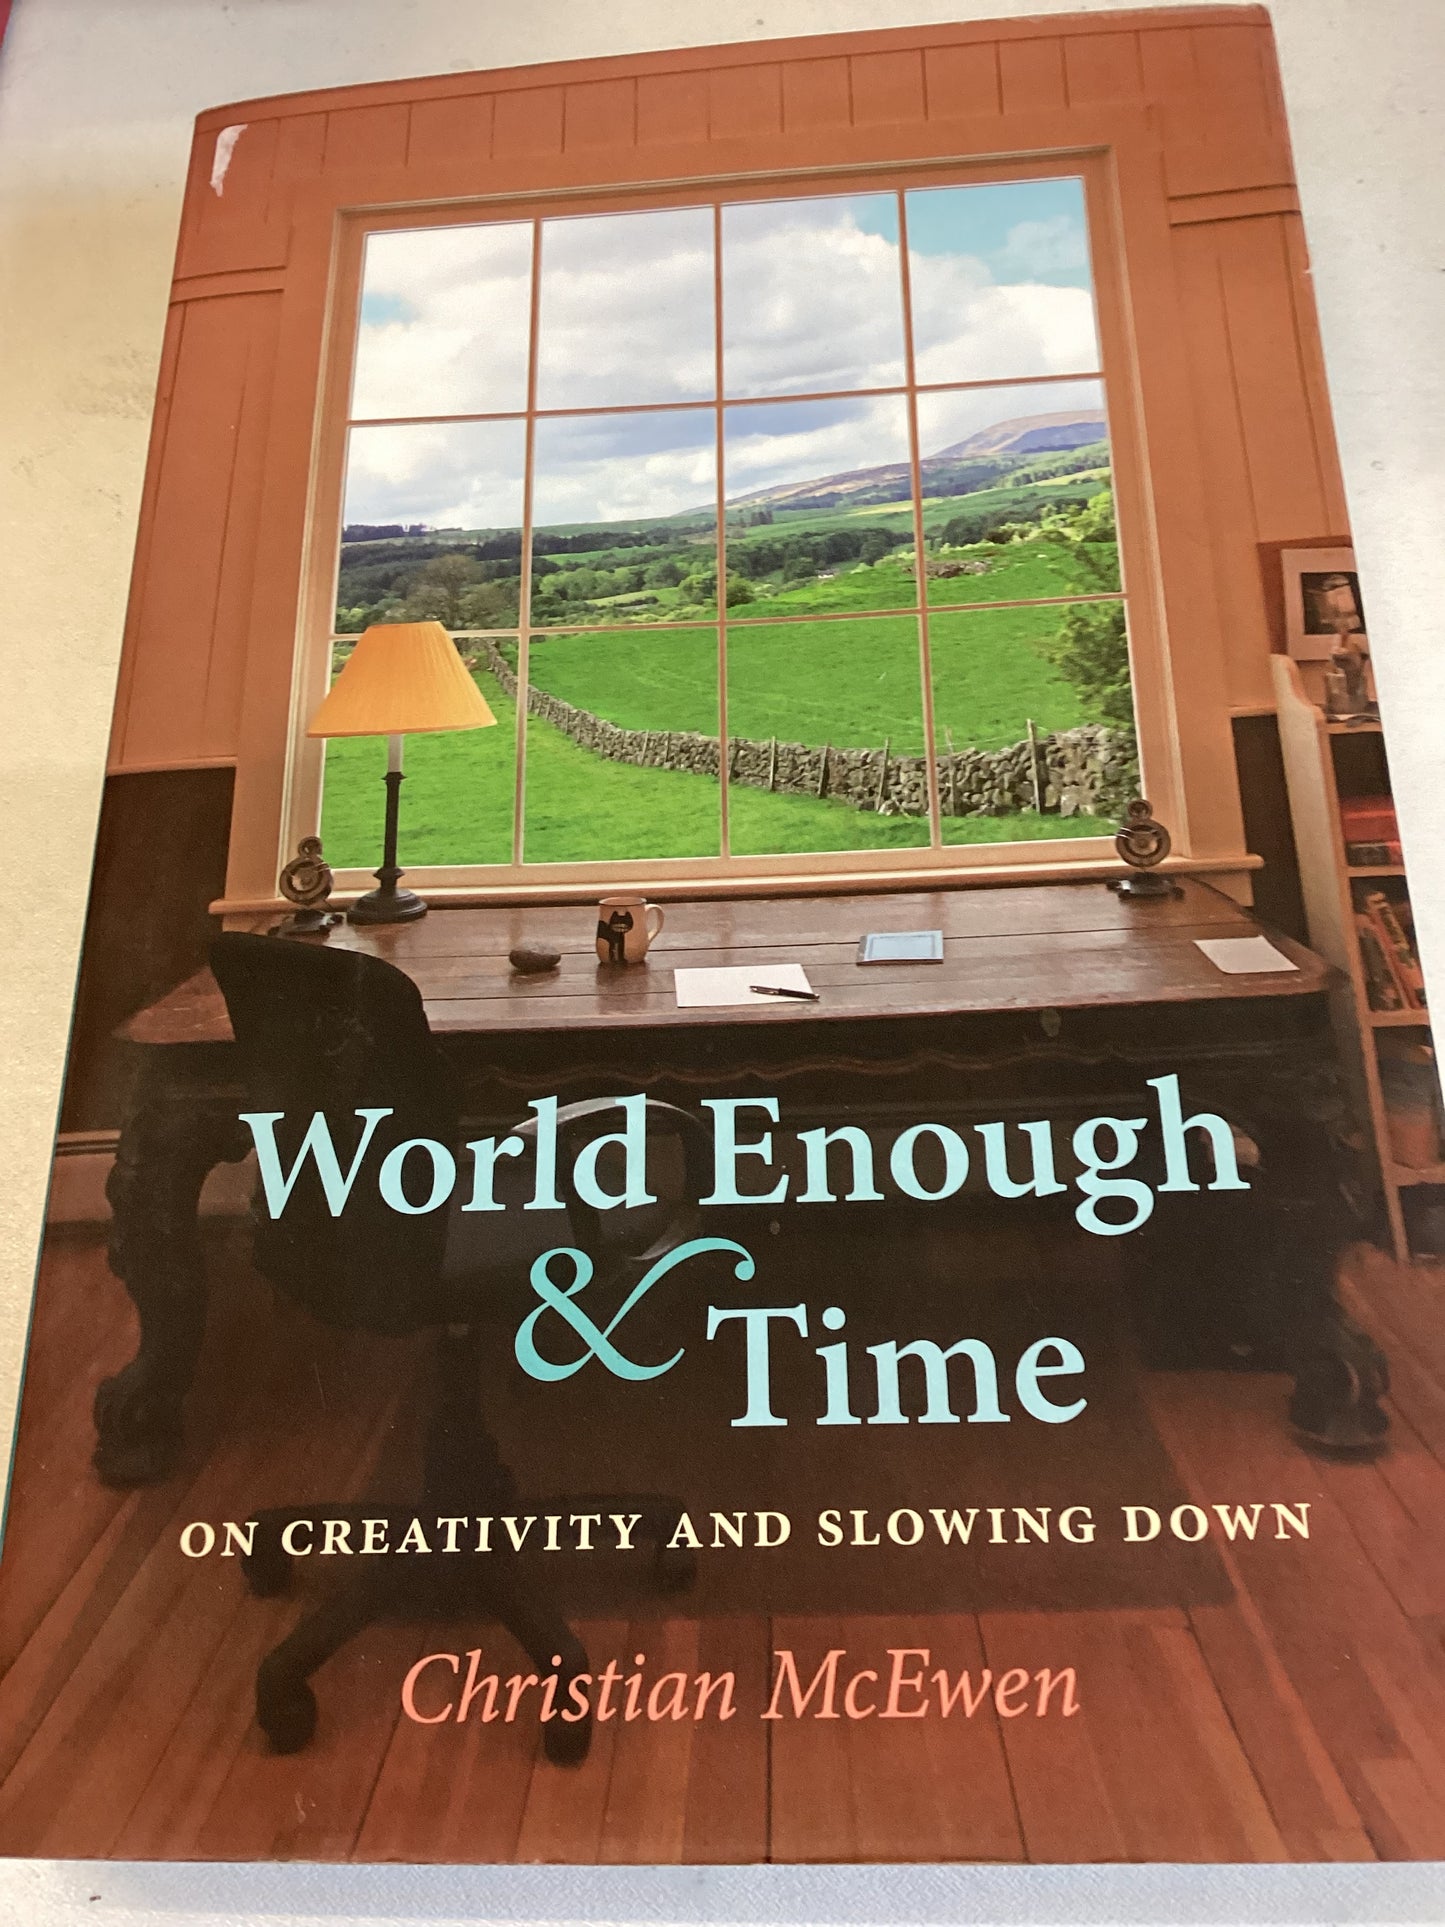 World Enough & Time on Creativity and Slowing Down Christian McEwan